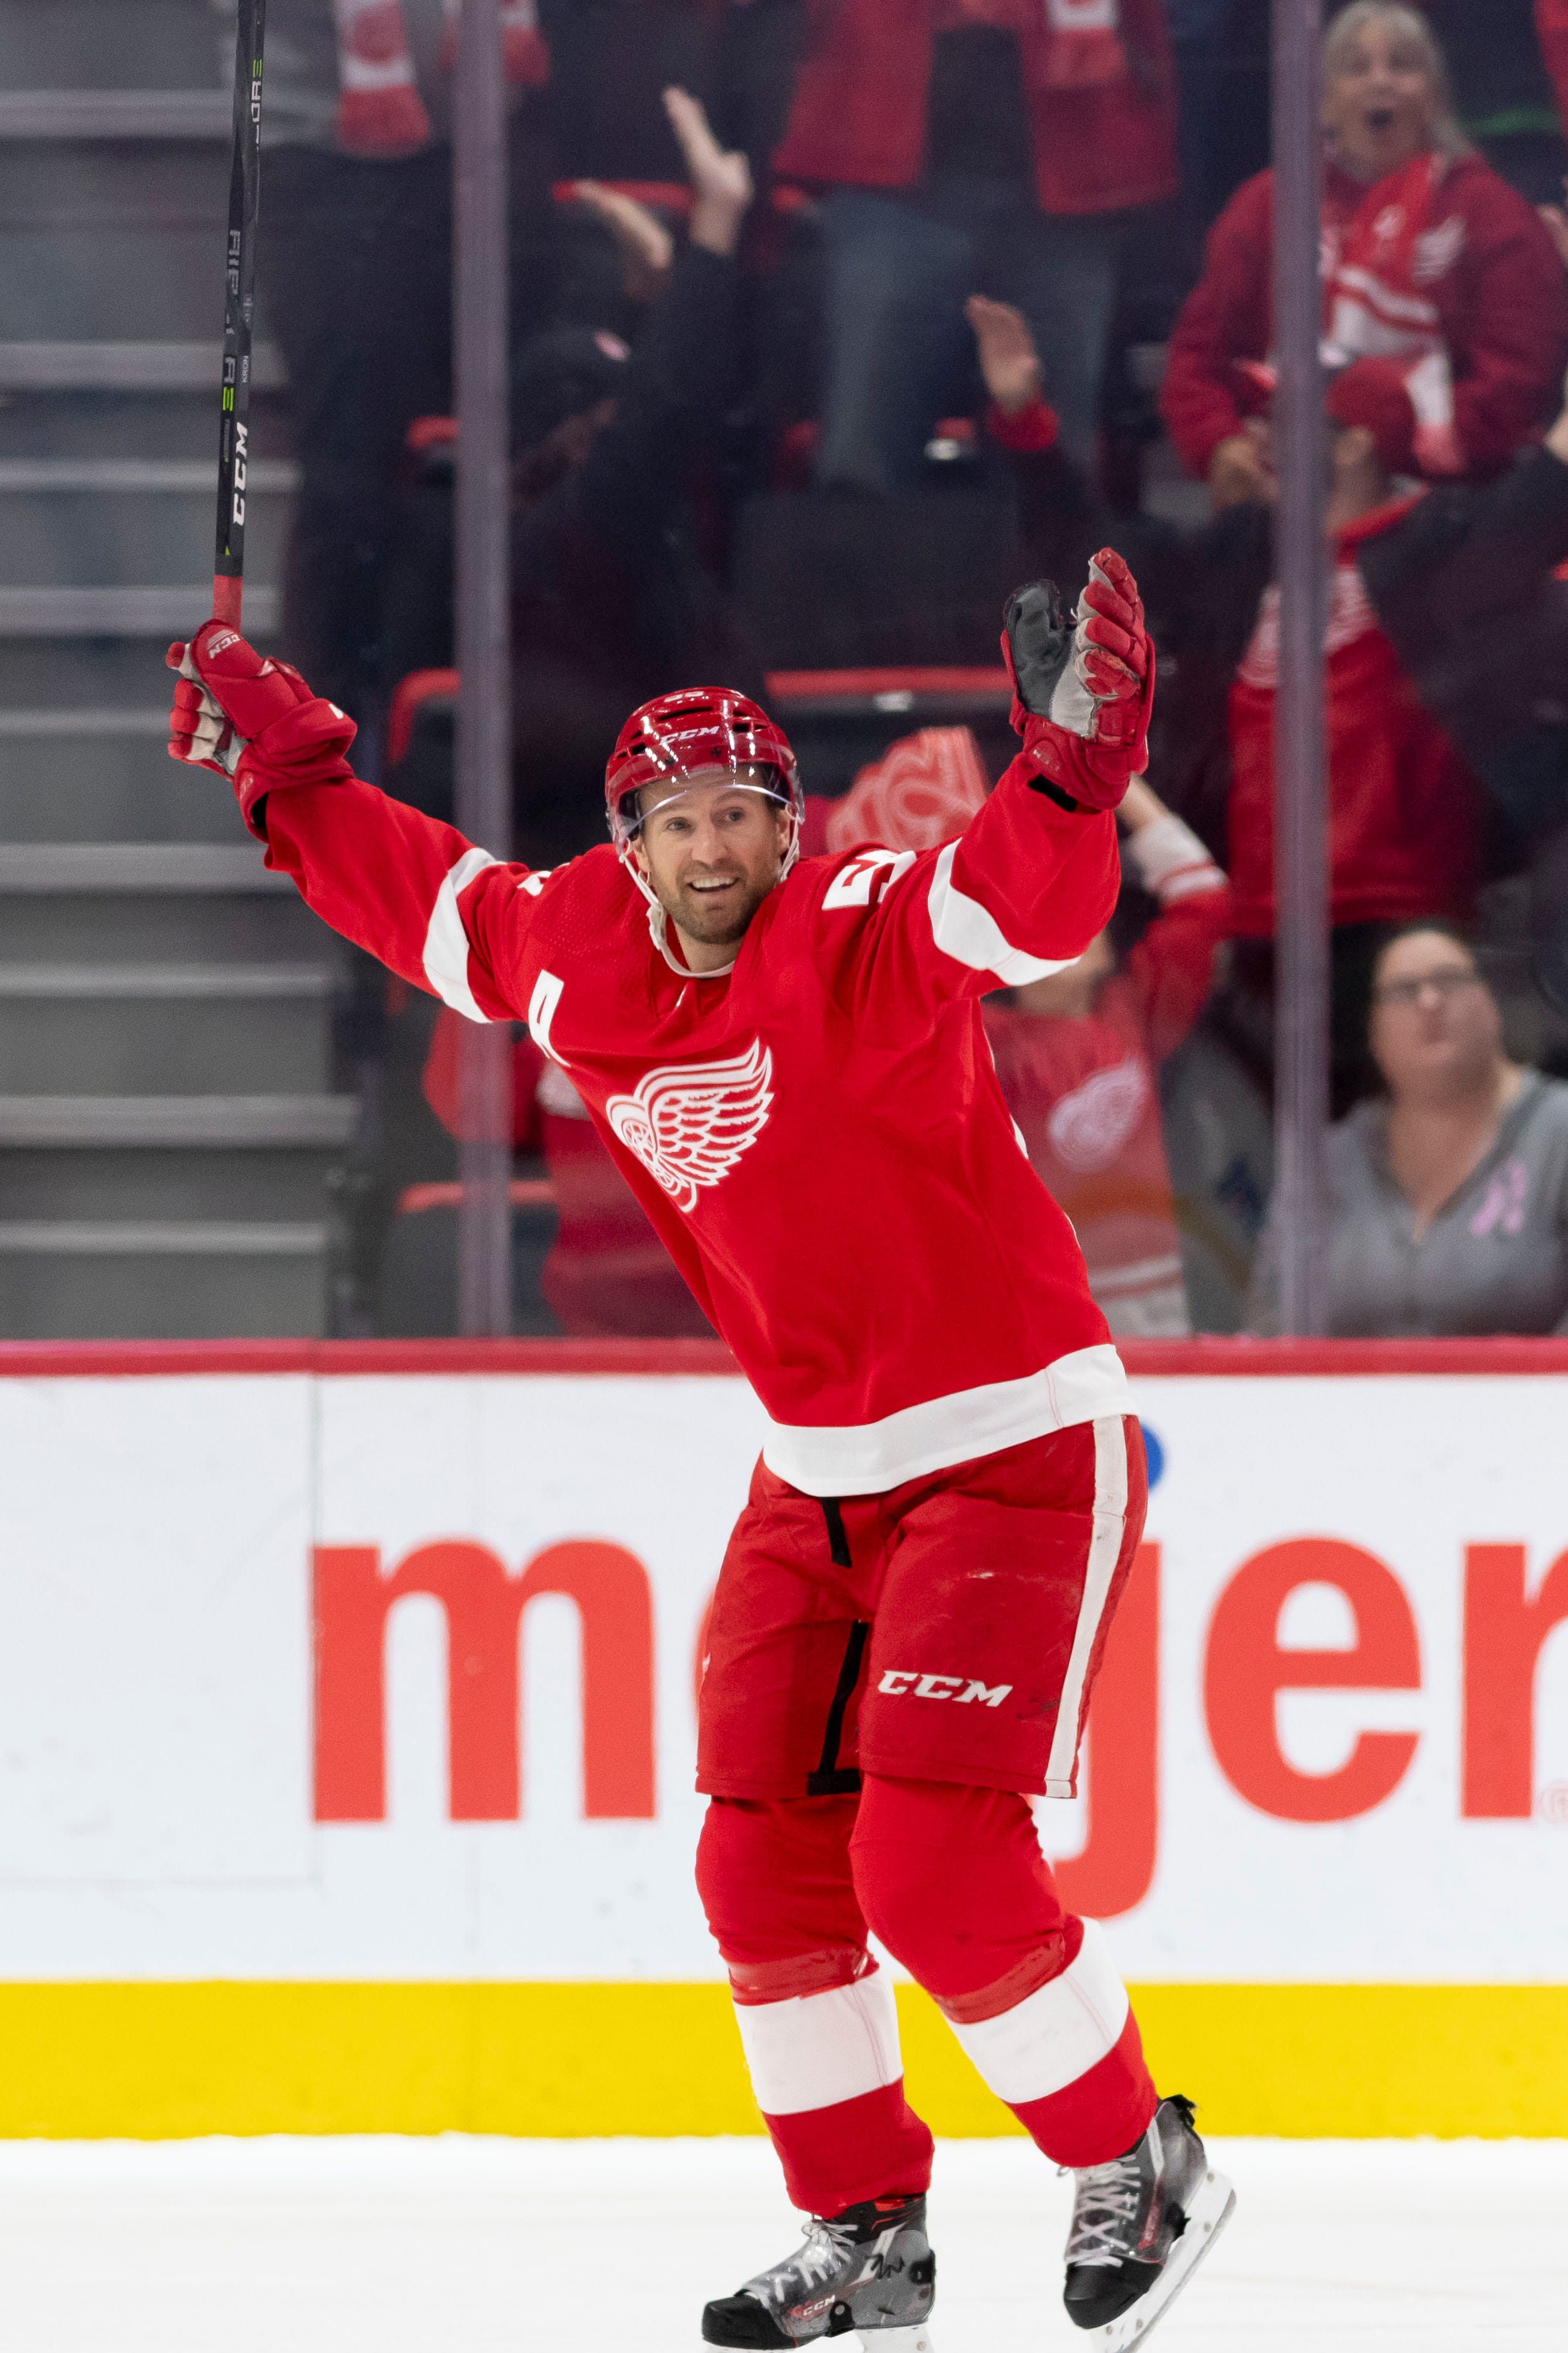 Detroit defenseman Niklas Kronwall celebrates an empty-net goal by defenseman Trevor Daley during a victory over the New Jersey Devils at Little Caesars Arena on Nov. 1, 2018.